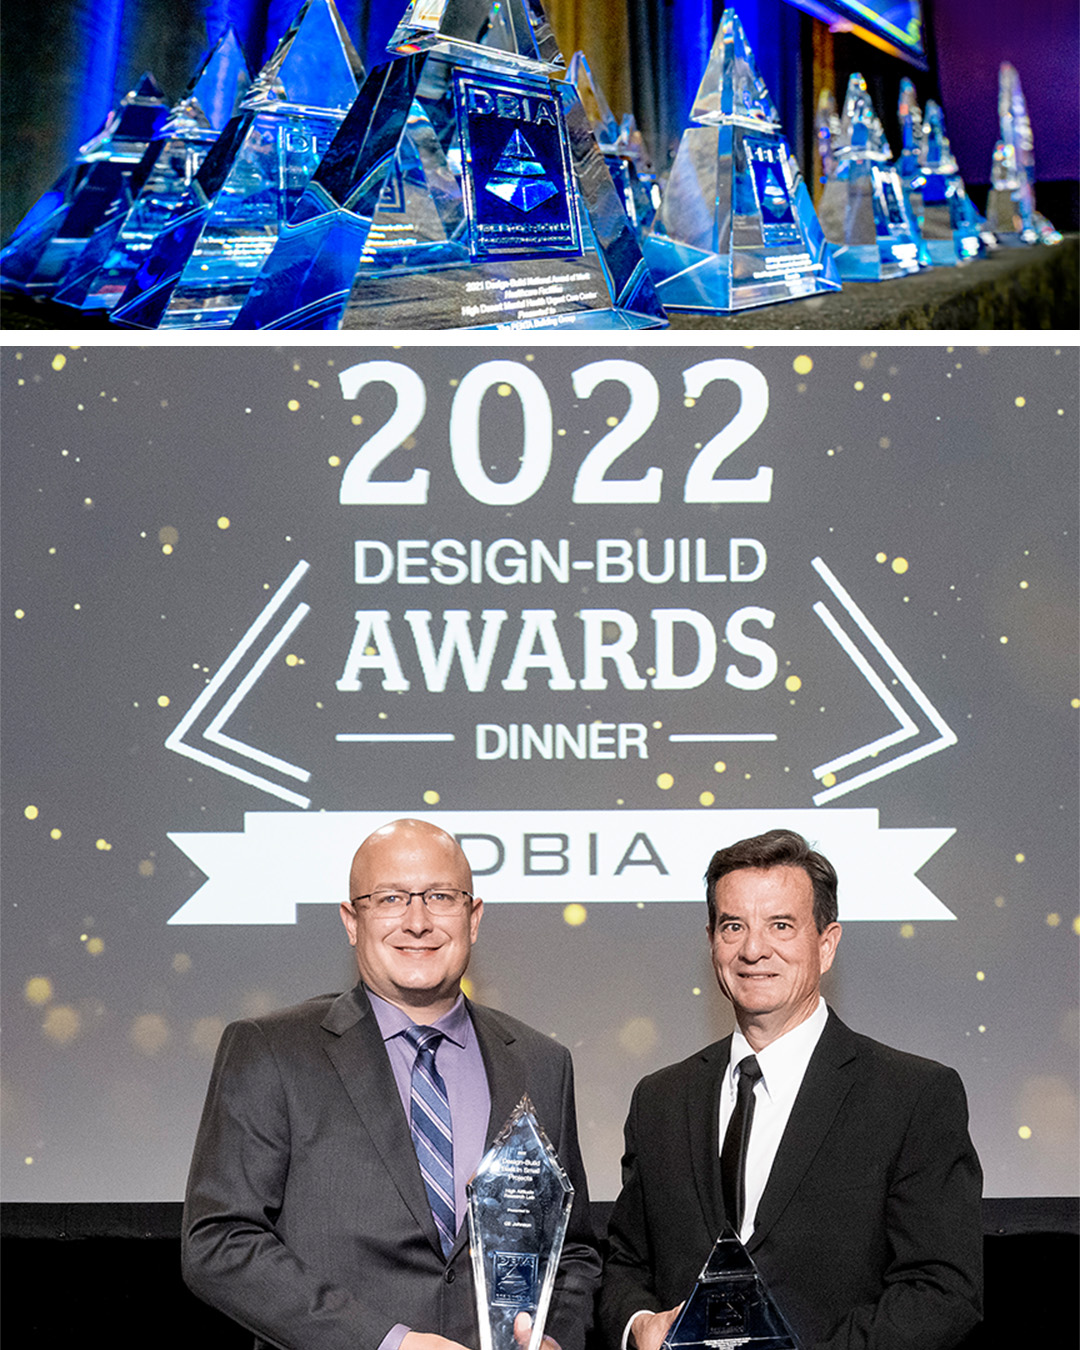 GE Johnson representatives receiving the 2022 Best Small Project and a Merit Award from the Design-Build Institute of America